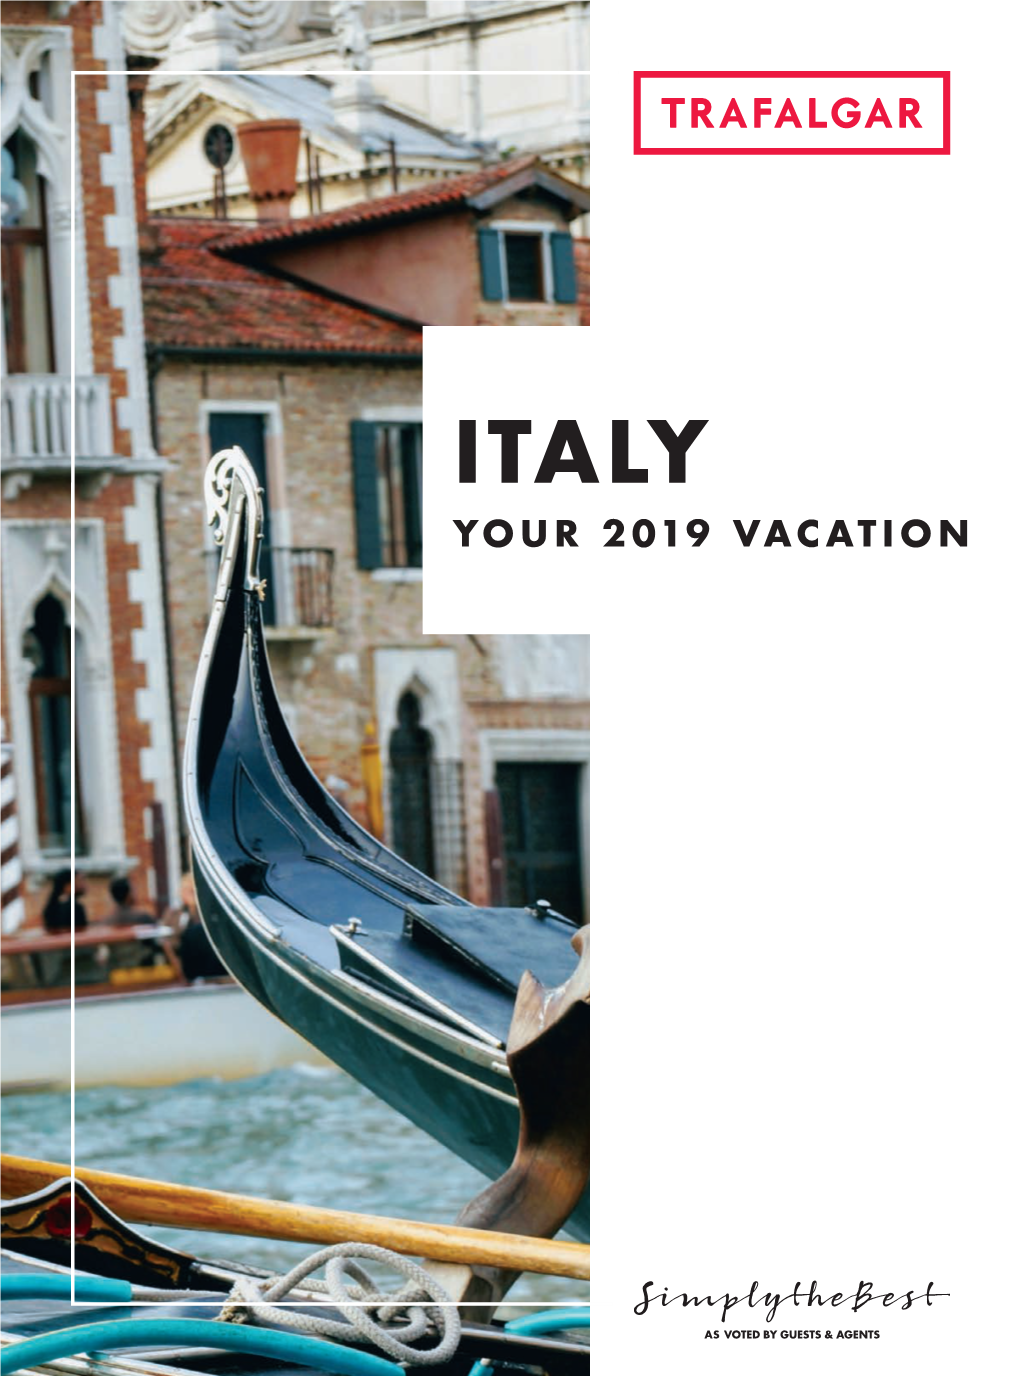 Your 2019 Vacation